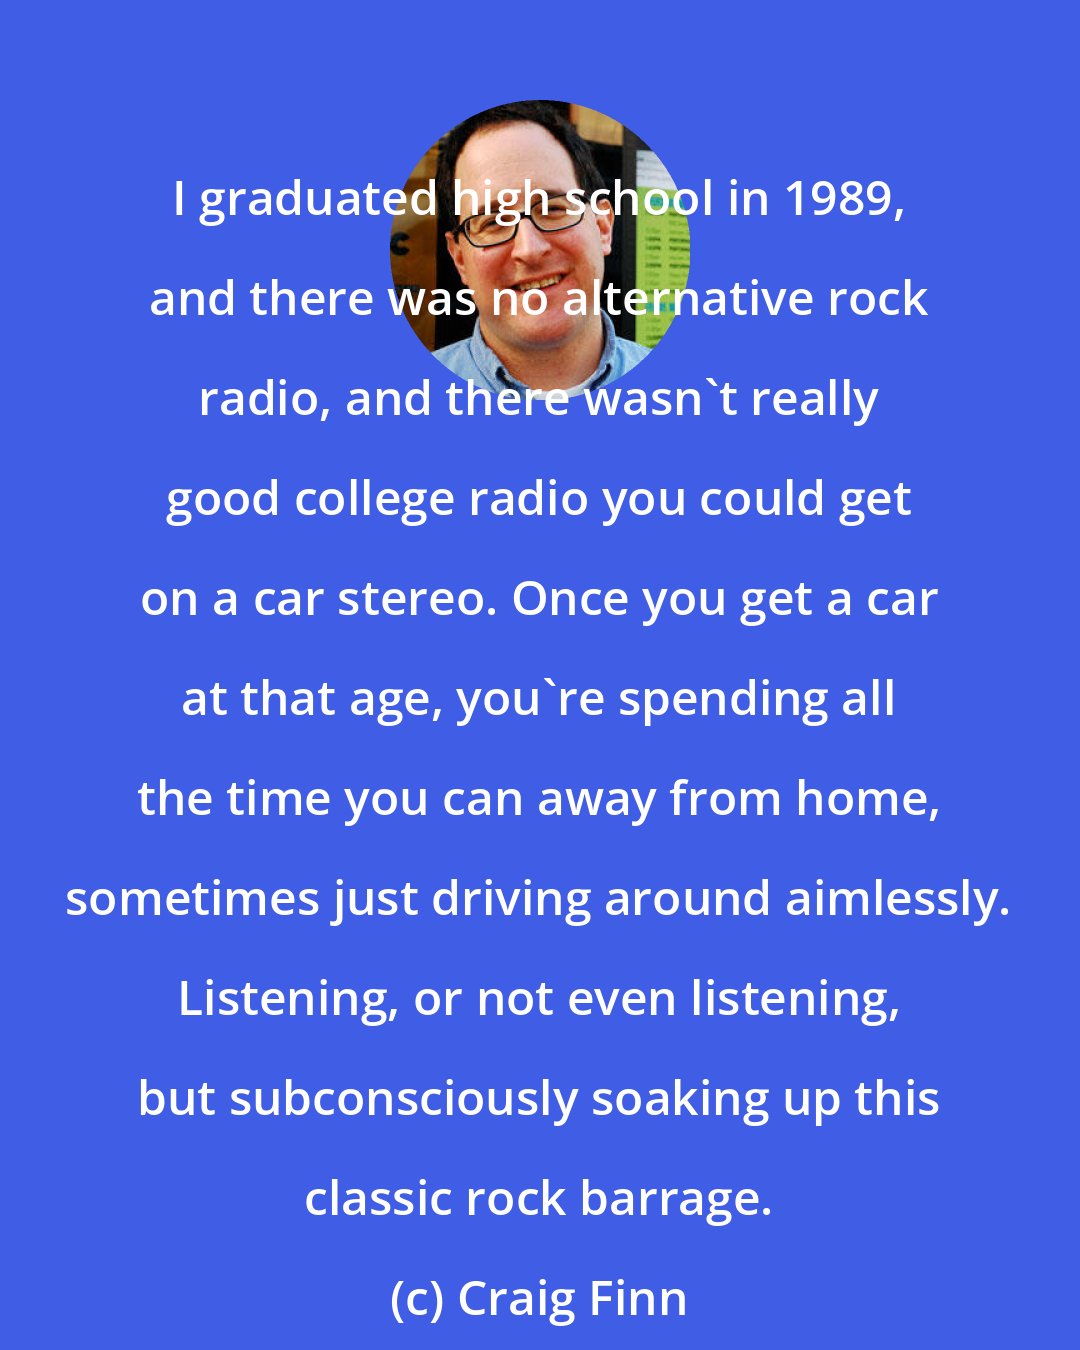 Craig Finn: I graduated high school in 1989, and there was no alternative rock radio, and there wasn't really good college radio you could get on a car stereo. Once you get a car at that age, you're spending all the time you can away from home, sometimes just driving around aimlessly. Listening, or not even listening, but subconsciously soaking up this classic rock barrage.